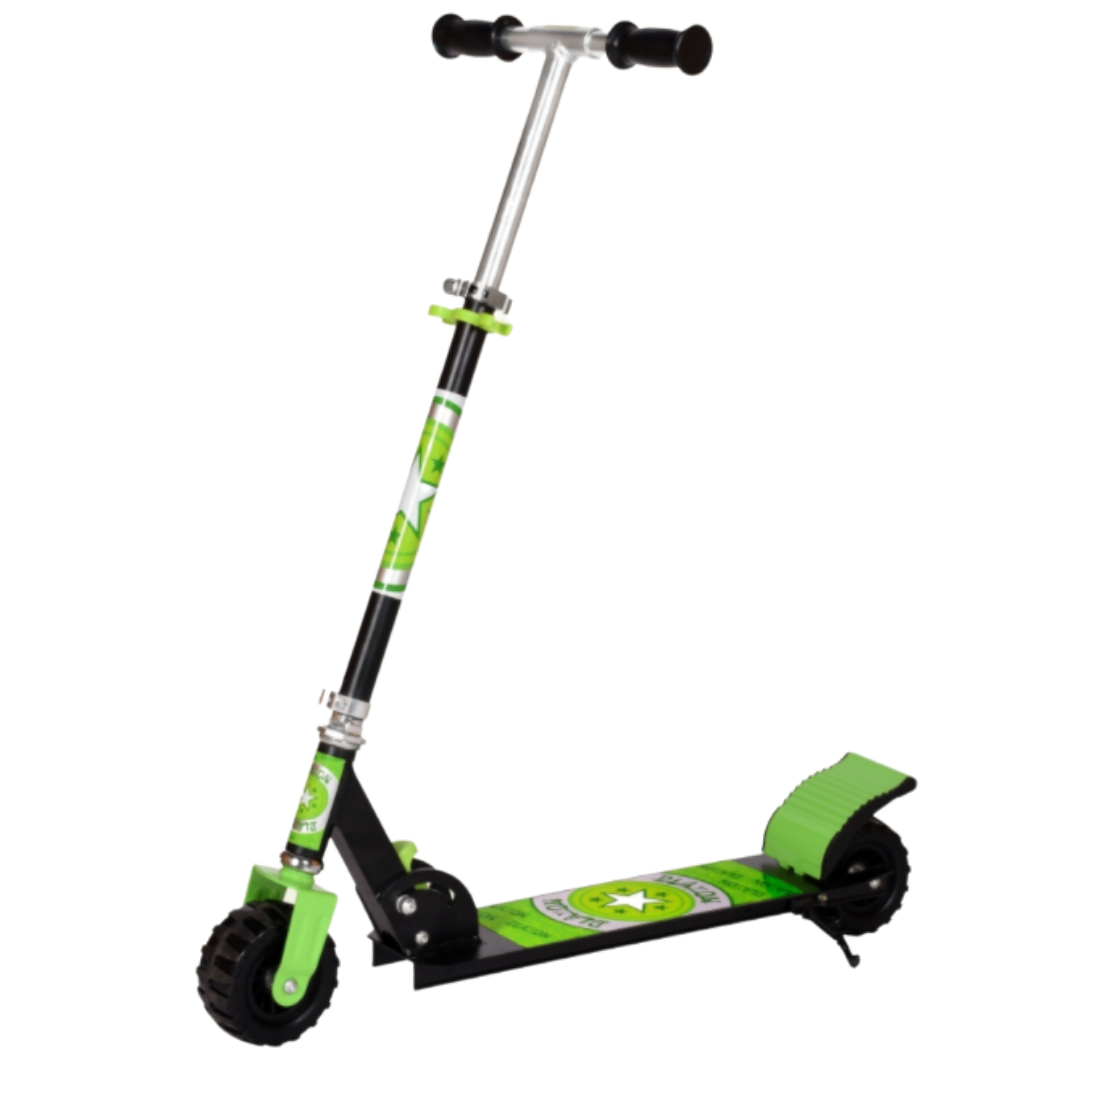 Control tube Albany Playon Scooter XLA 200 Adjustable Handle, Side Stand with 2 Smooth Bea –  The Fun Basket™